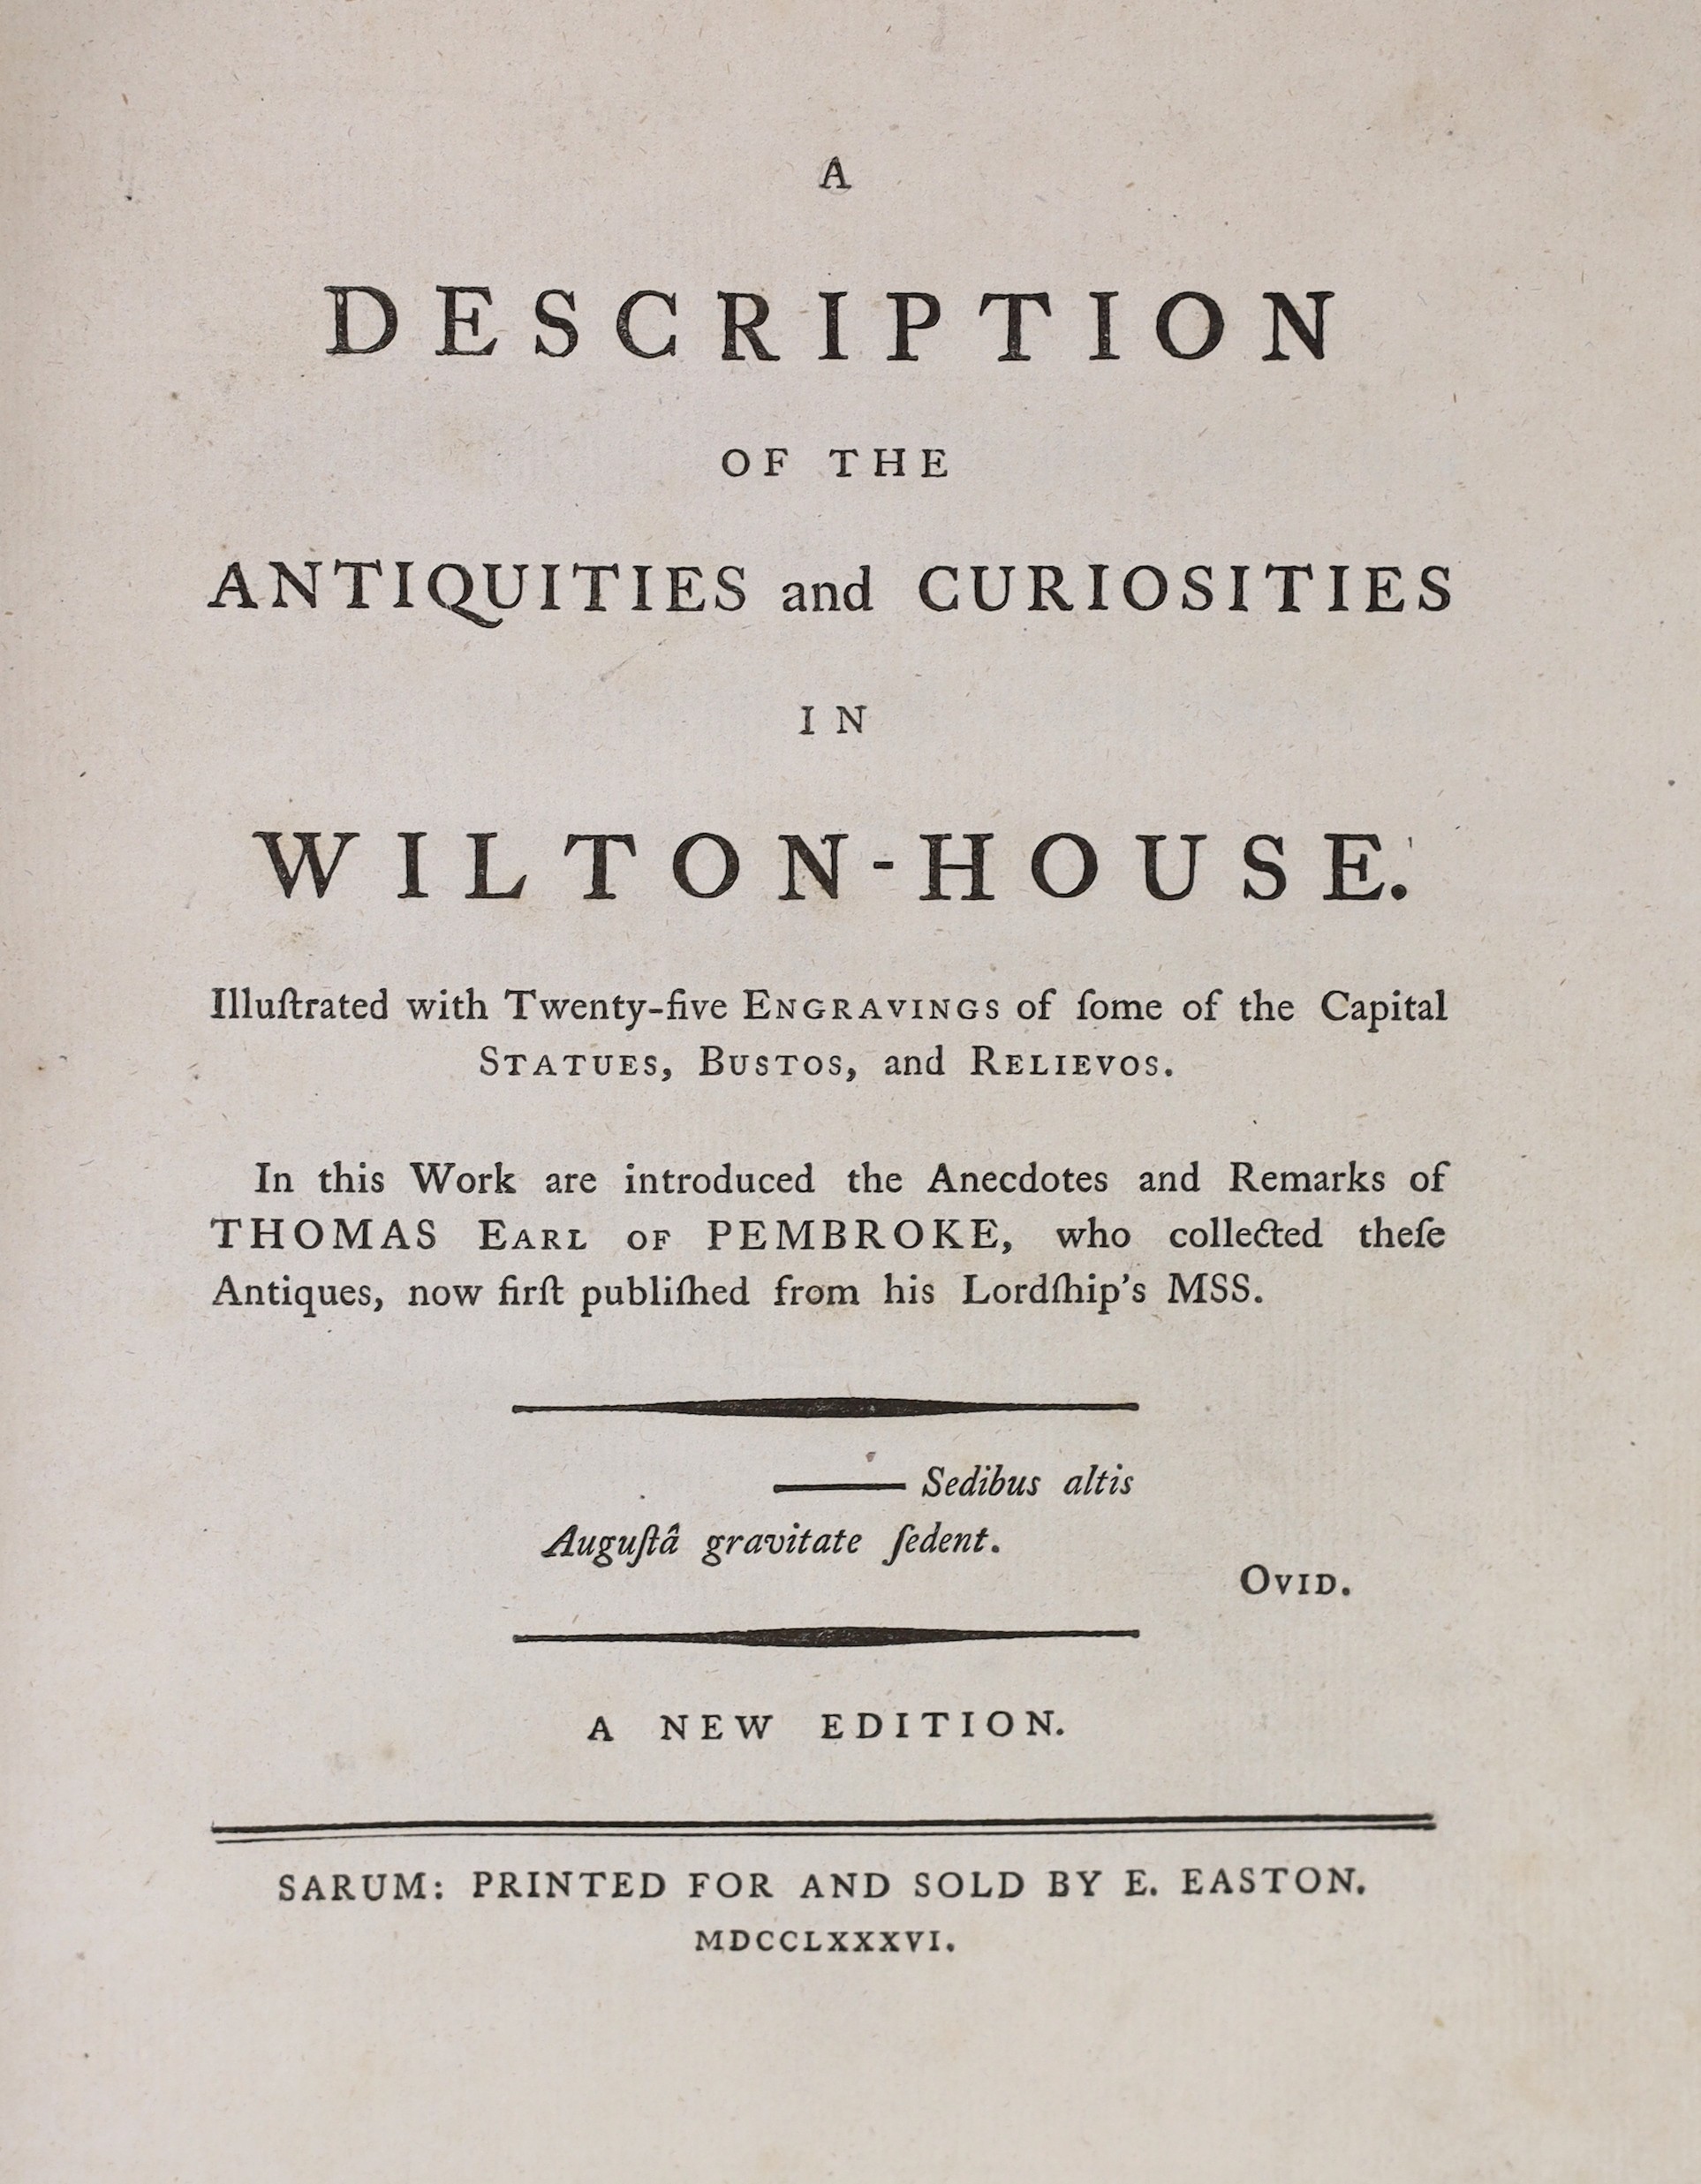 WILTS: A Description of the Antiquities and Curiosities in Wilton-House ... new edition. 25 plates, text decorations, half title; 20th cent. half calf and cloth, with black label, roy.4to. Sarum, 1786